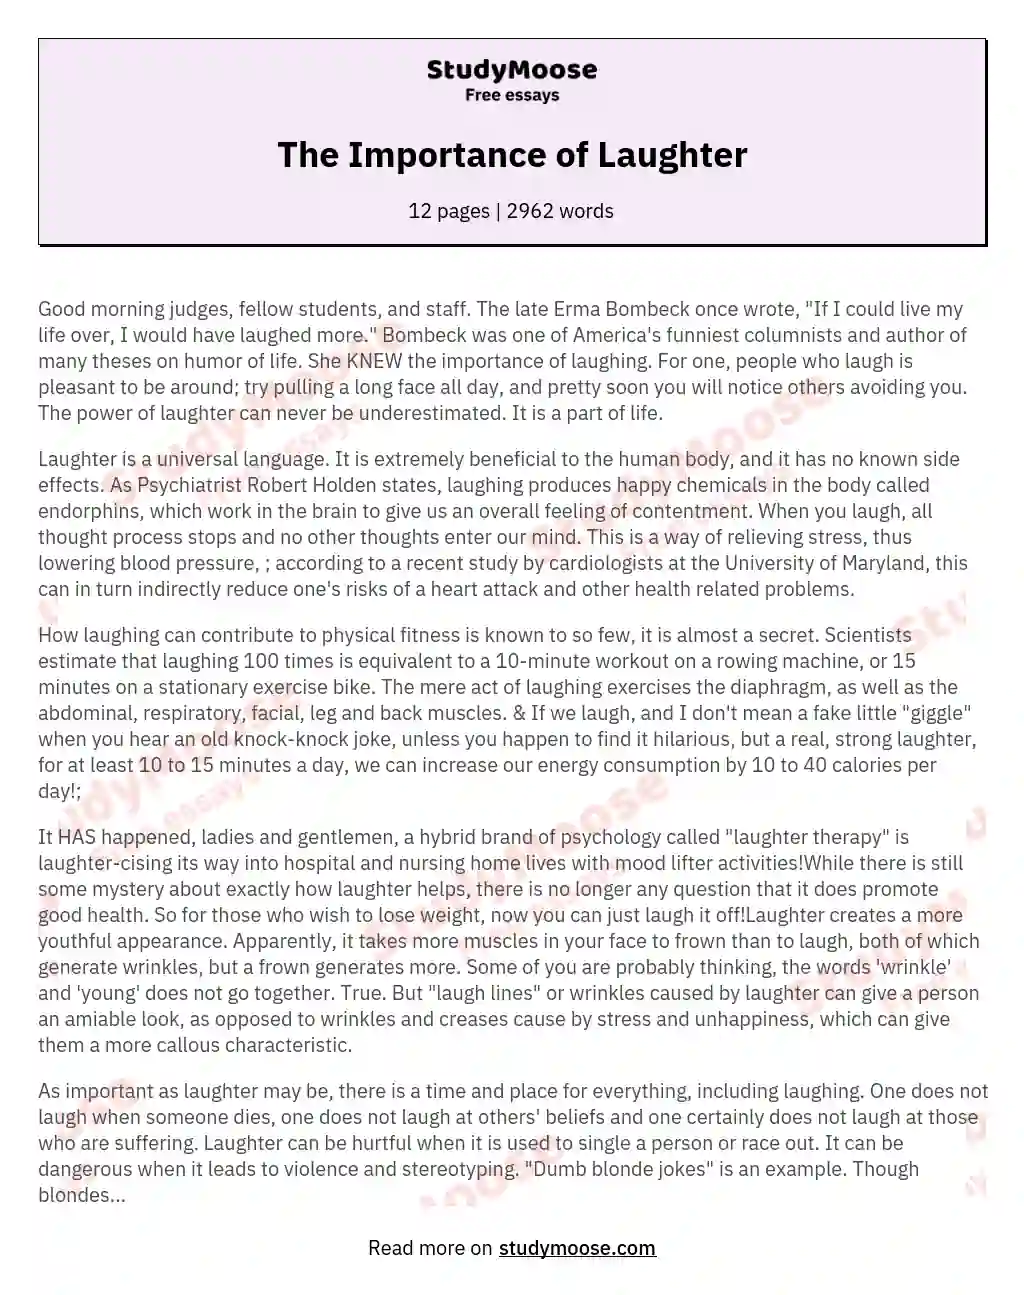 The Importance of Laughter essay